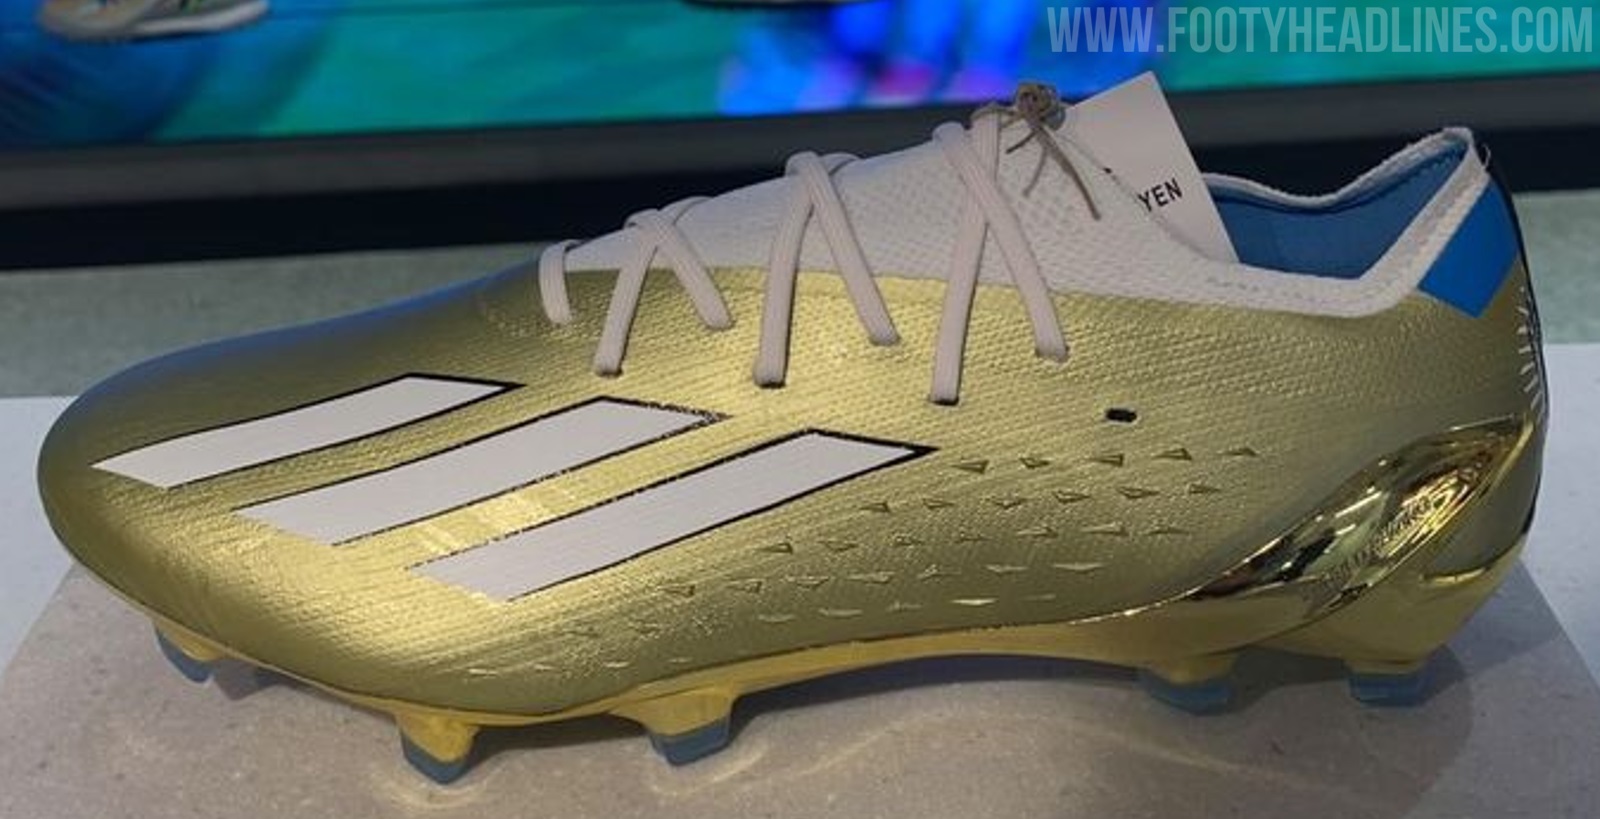 Nike Football Boots 2022 Messi